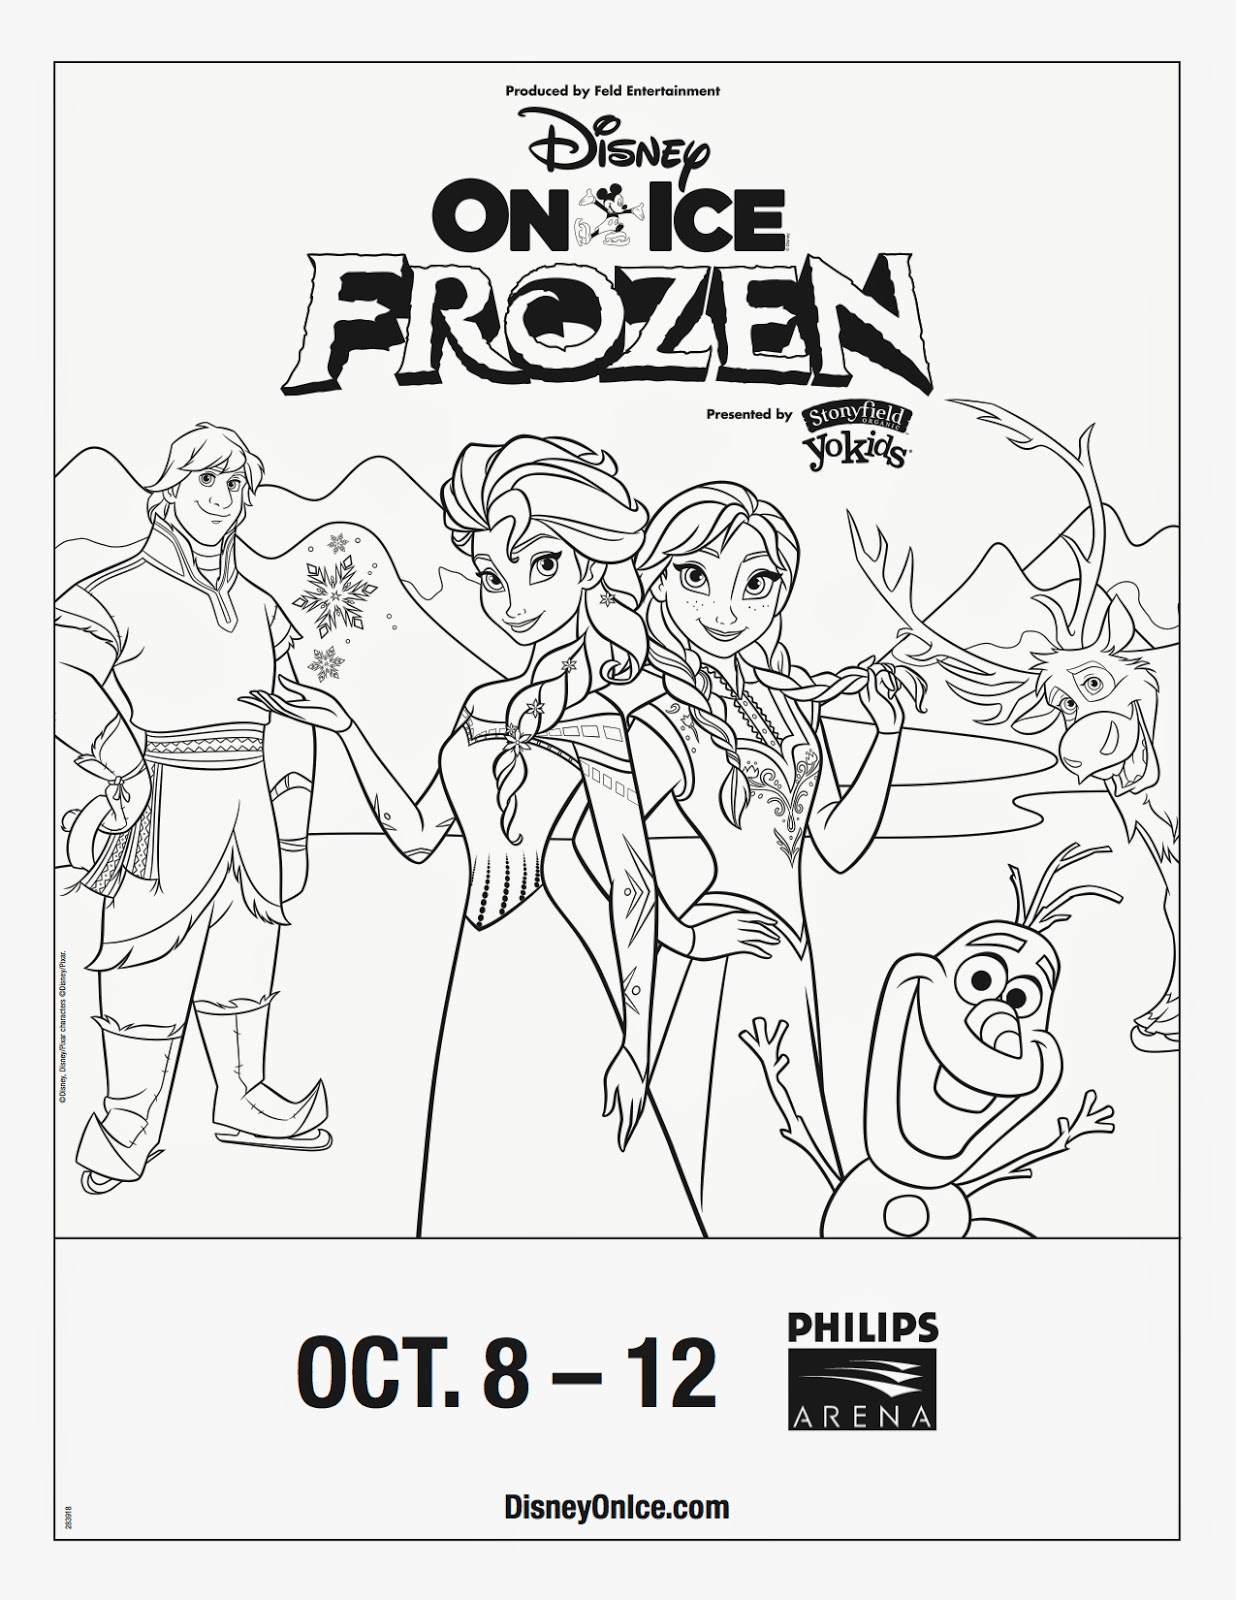 Savvy and Sassy: Disney on Ice Frozen Coloring Sheet and Trivia